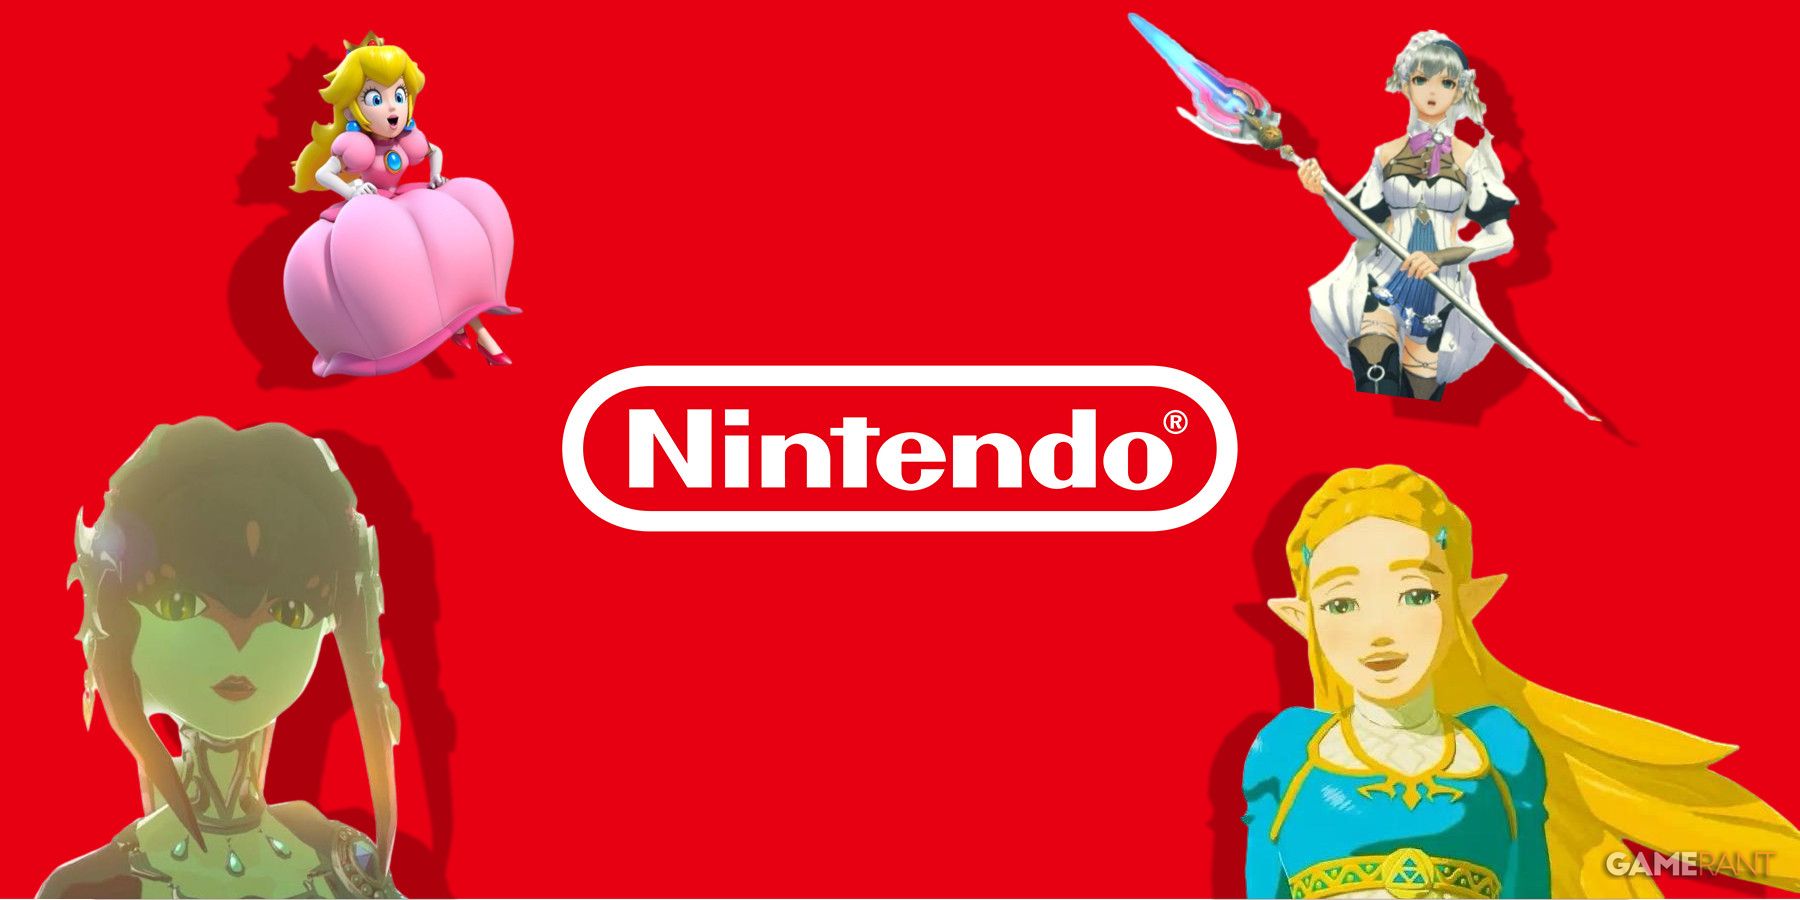 Best Royals In Nintendo Games - Who's Your Favourite?